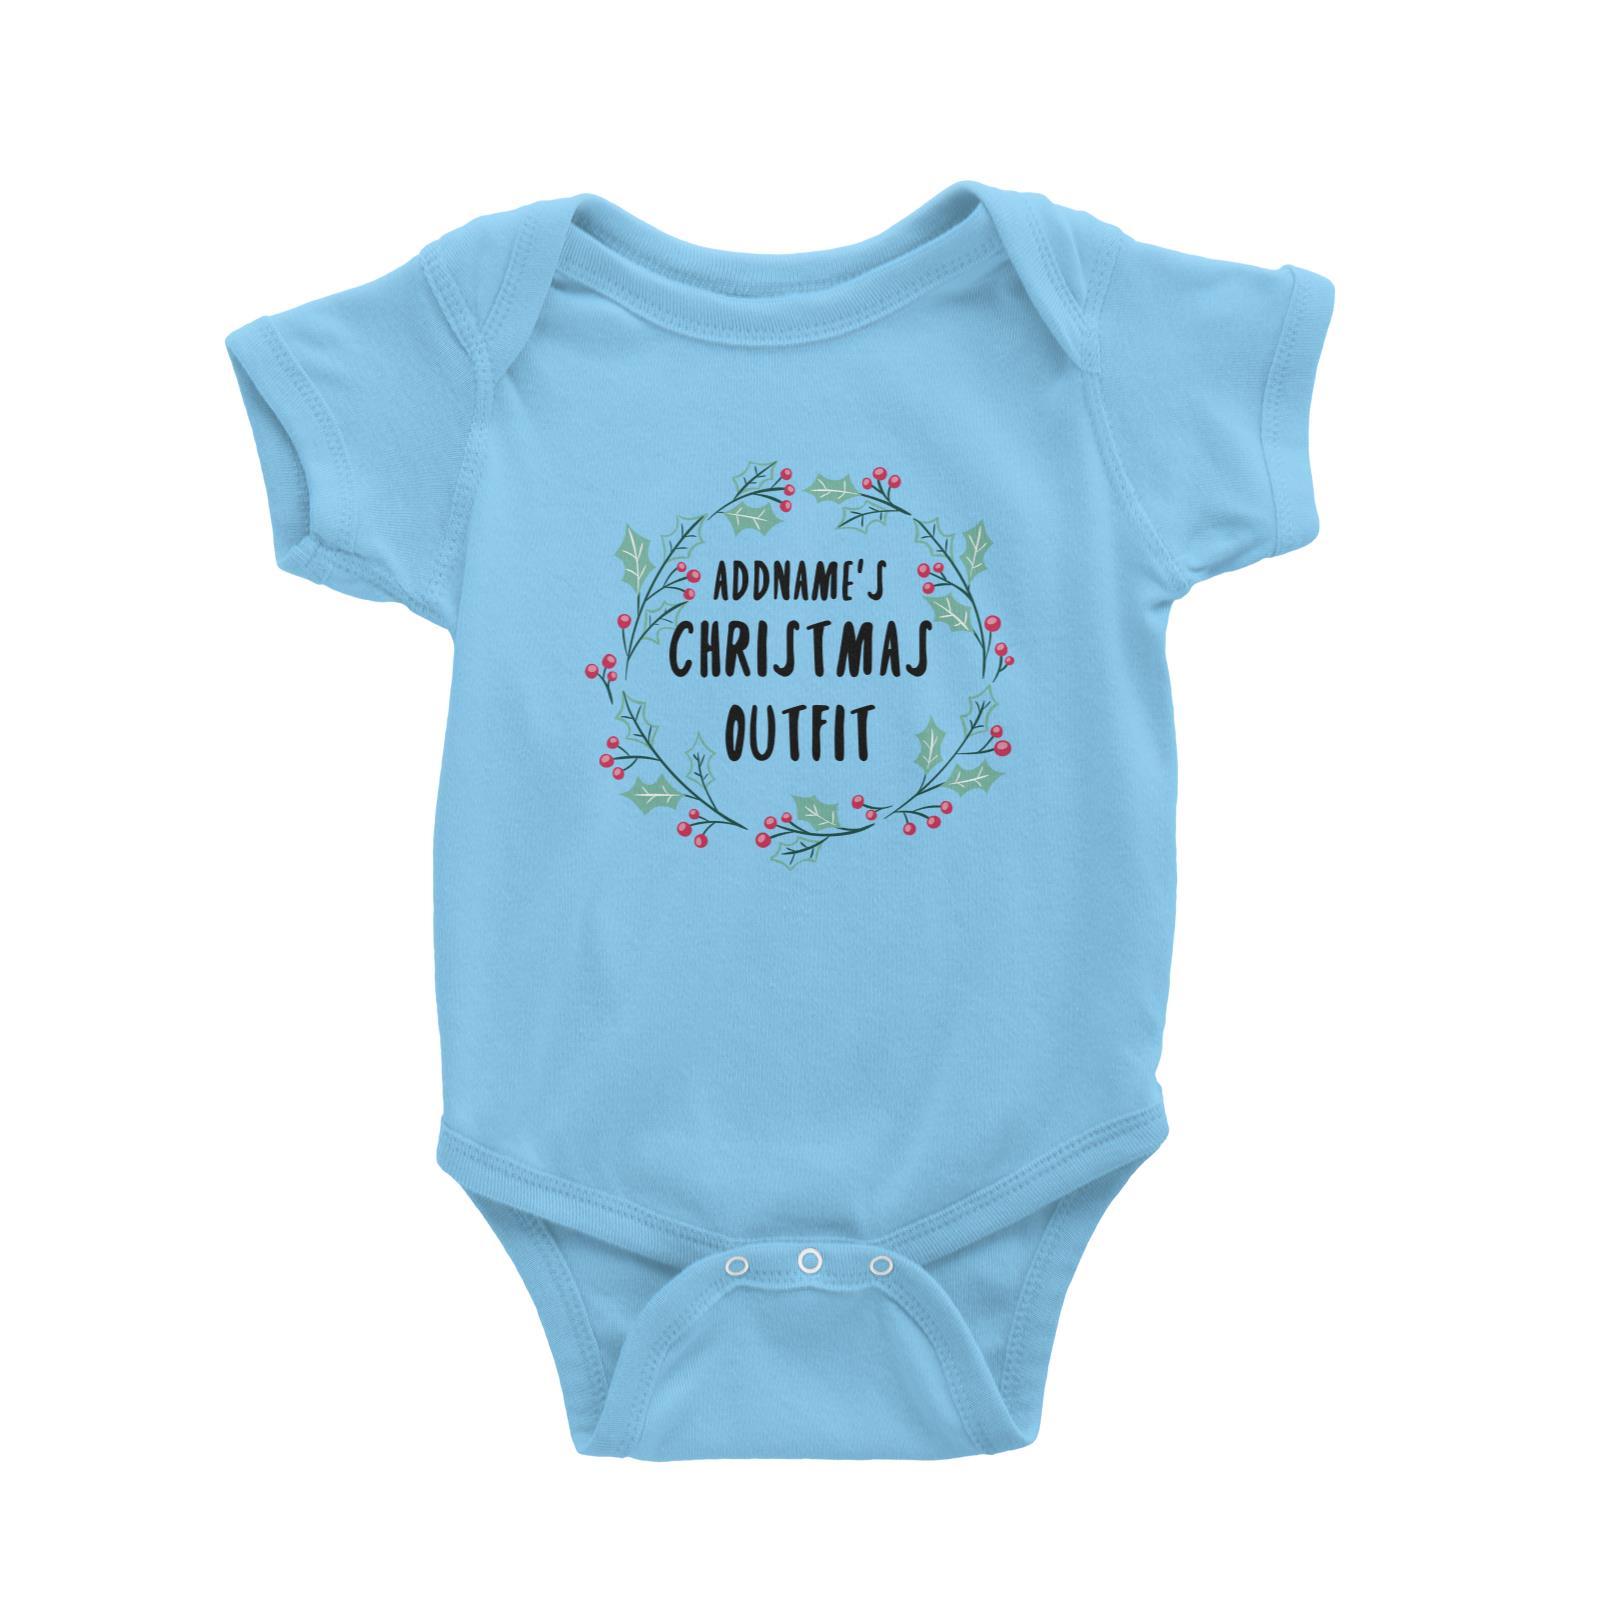 Holly Wreath Addname's Christmas Outfit Baby Romper  Personalizable Designs Matching Family